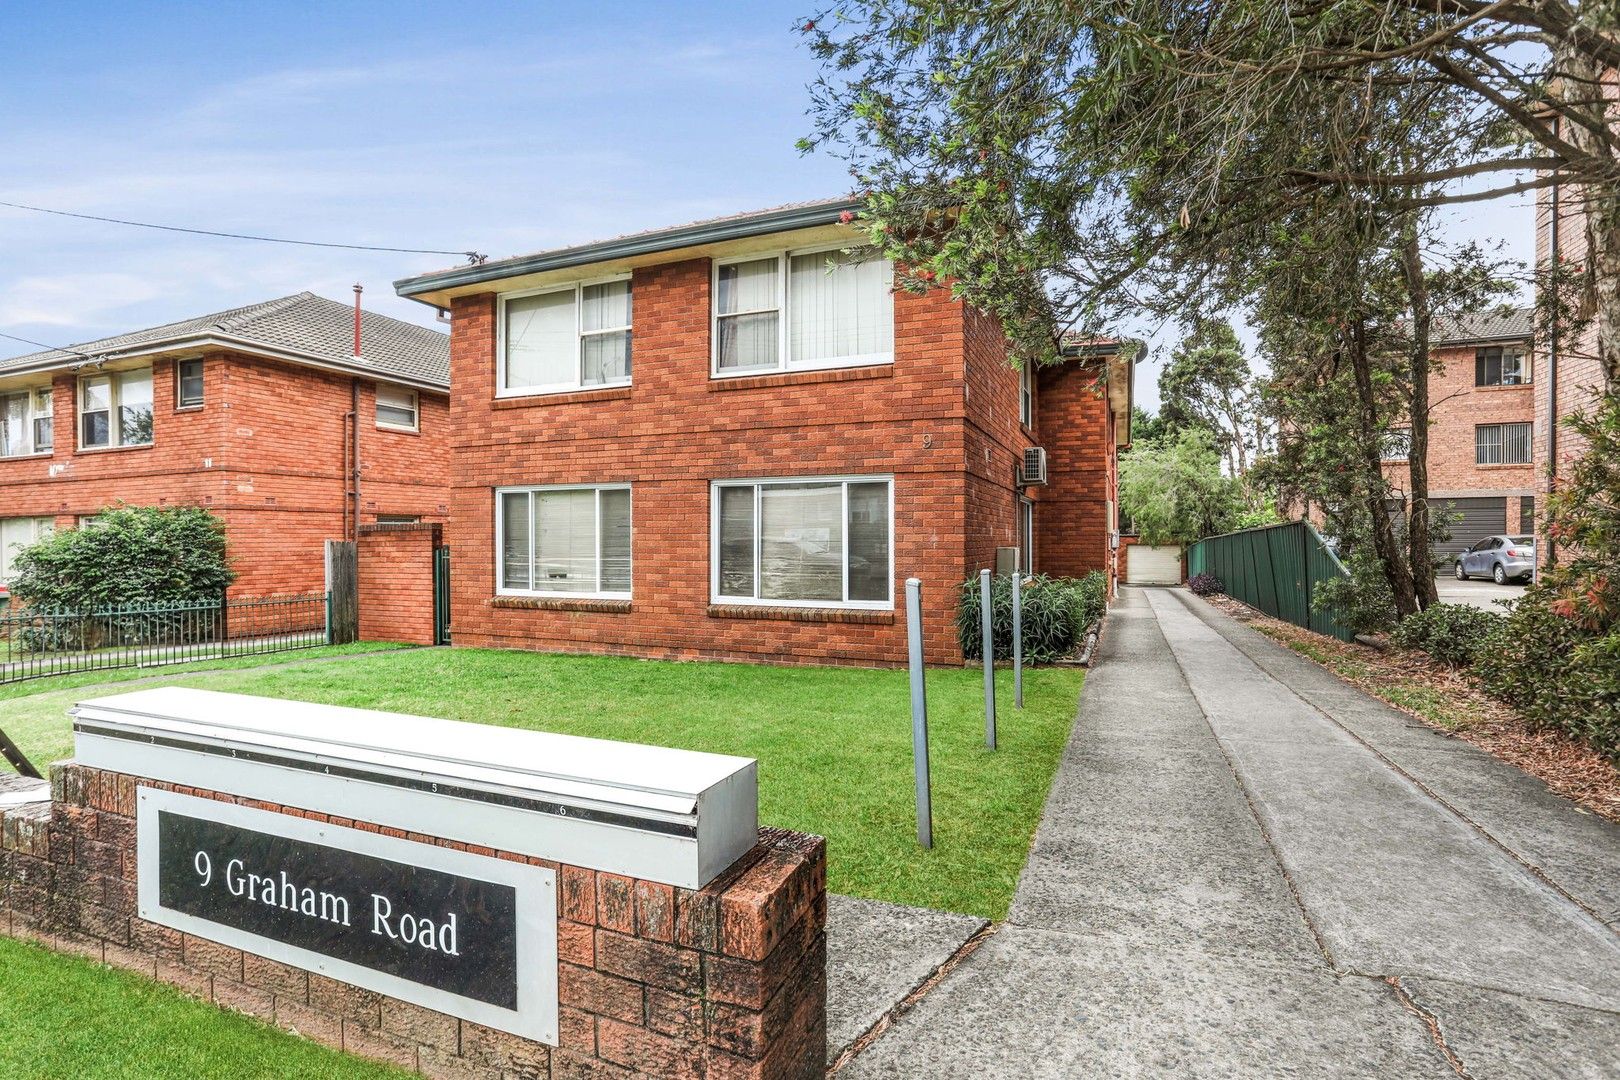 2 bedrooms Apartment / Unit / Flat in 5/9 Graham Road NARWEE NSW, 2209